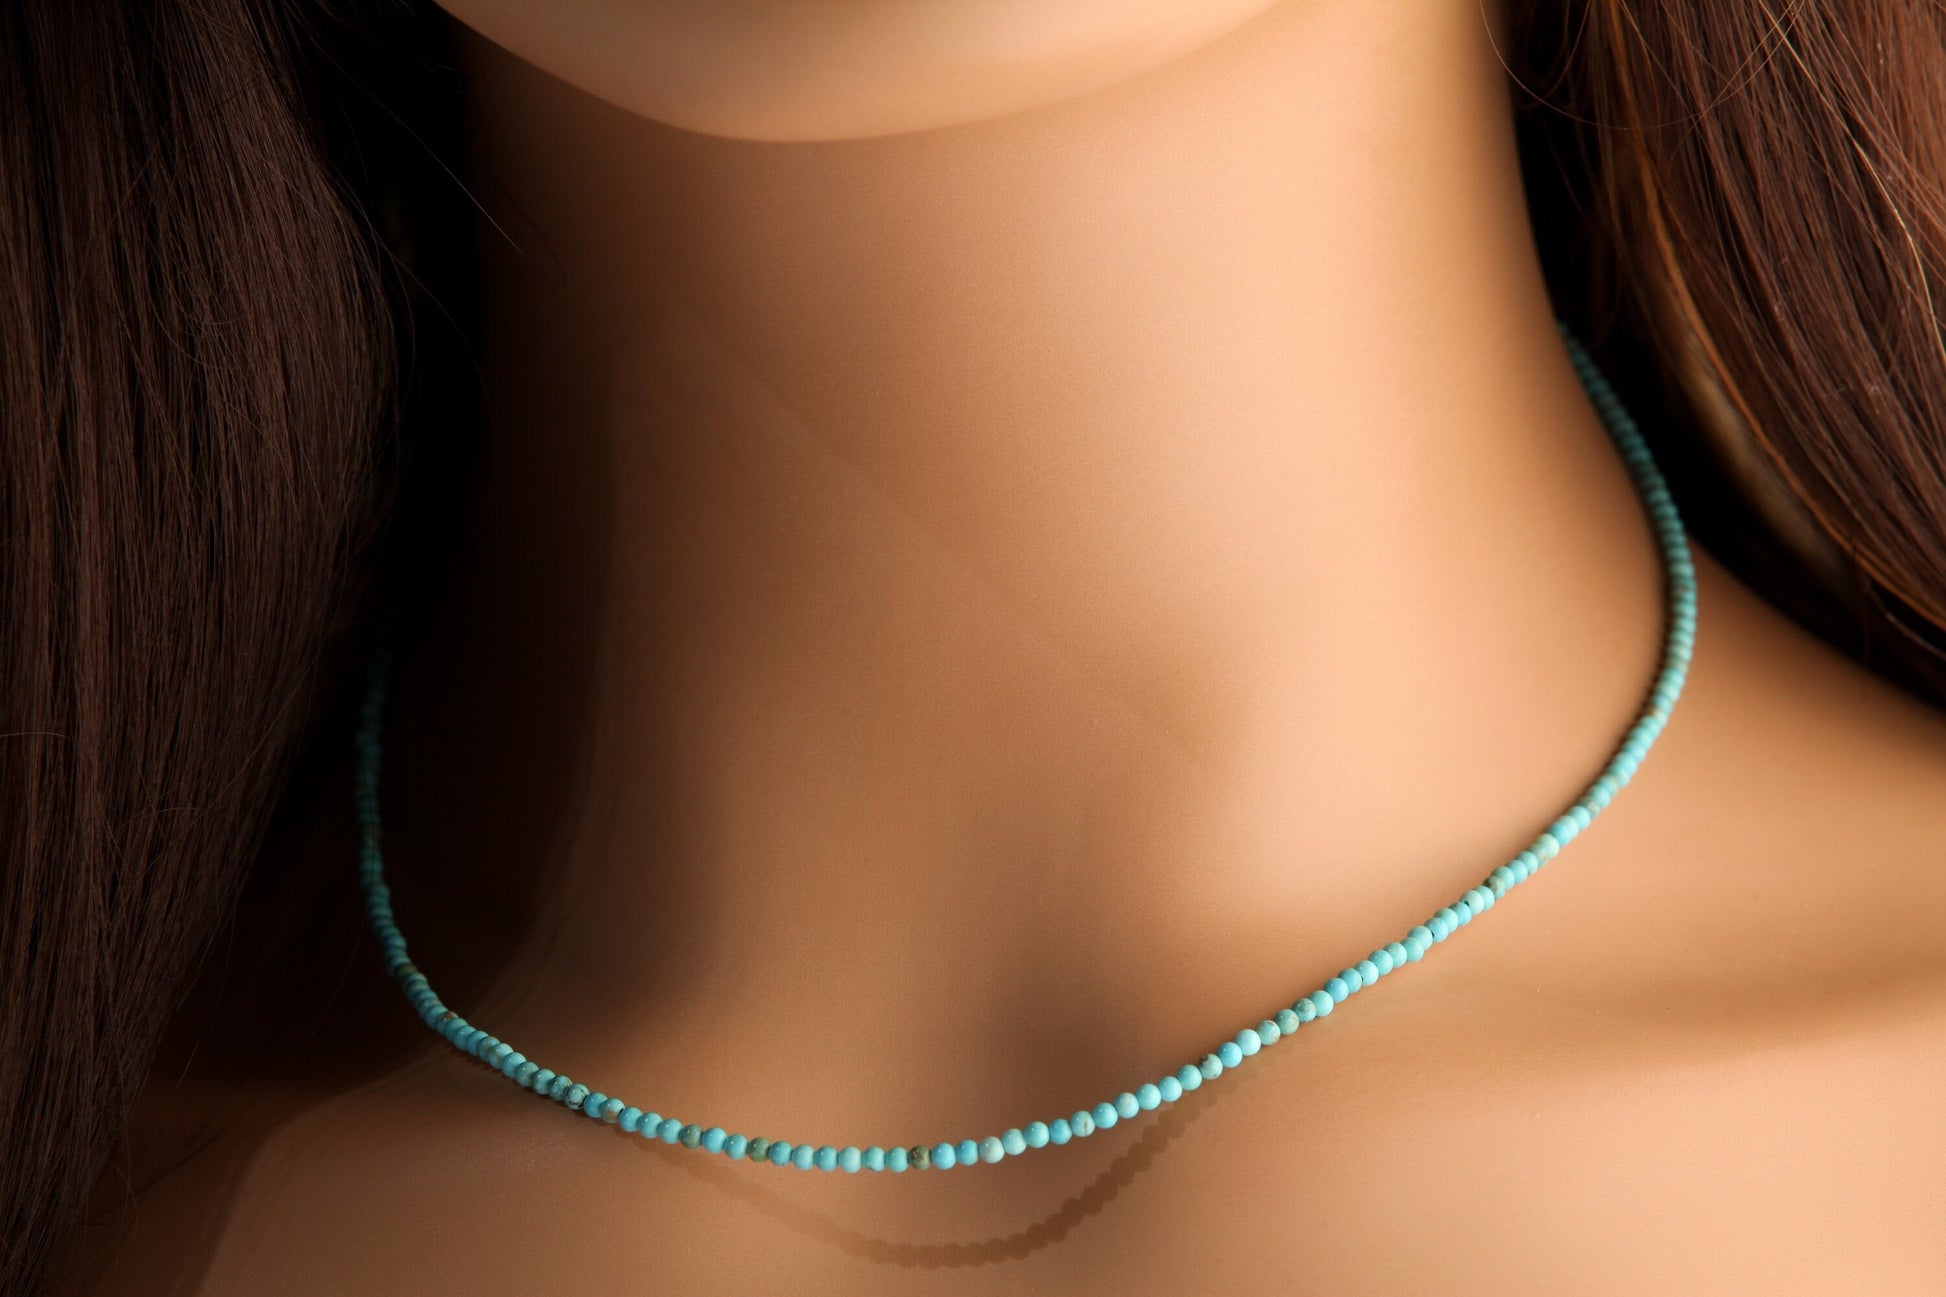 Genuine Blue Turquoise 2-2.5mm Smooth Round Choker Hand Made Necklace in 925 Sterling Silver, December Birth Stone, Man or Woman gifts